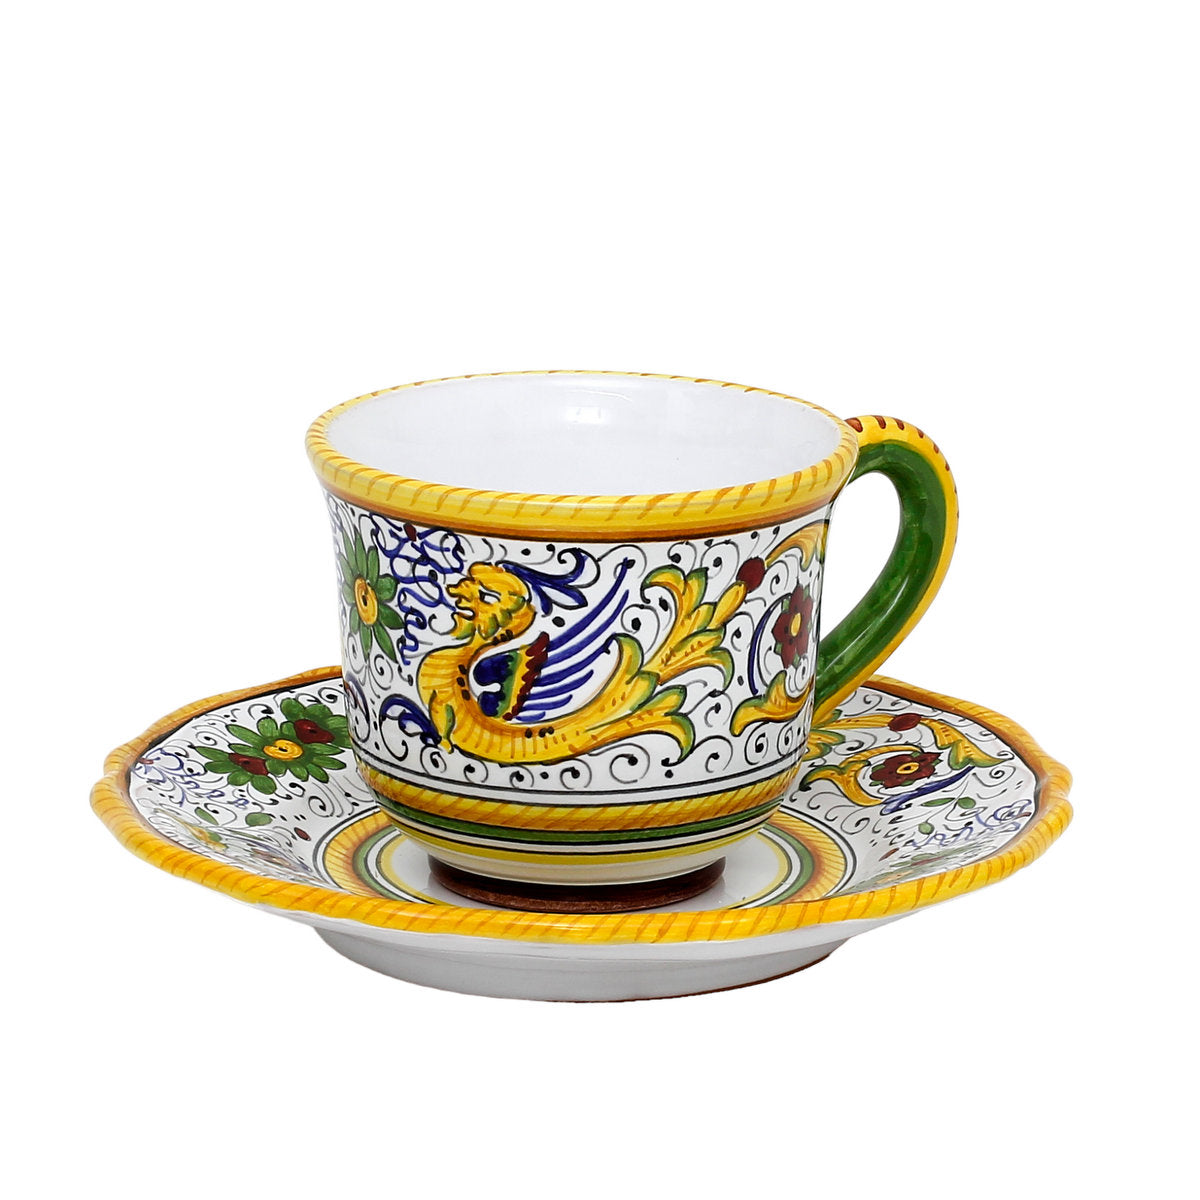 Sorrento Pottery - Espresso Cup(3fl.oz)With Saucer Made/Painted by hand in  Italy